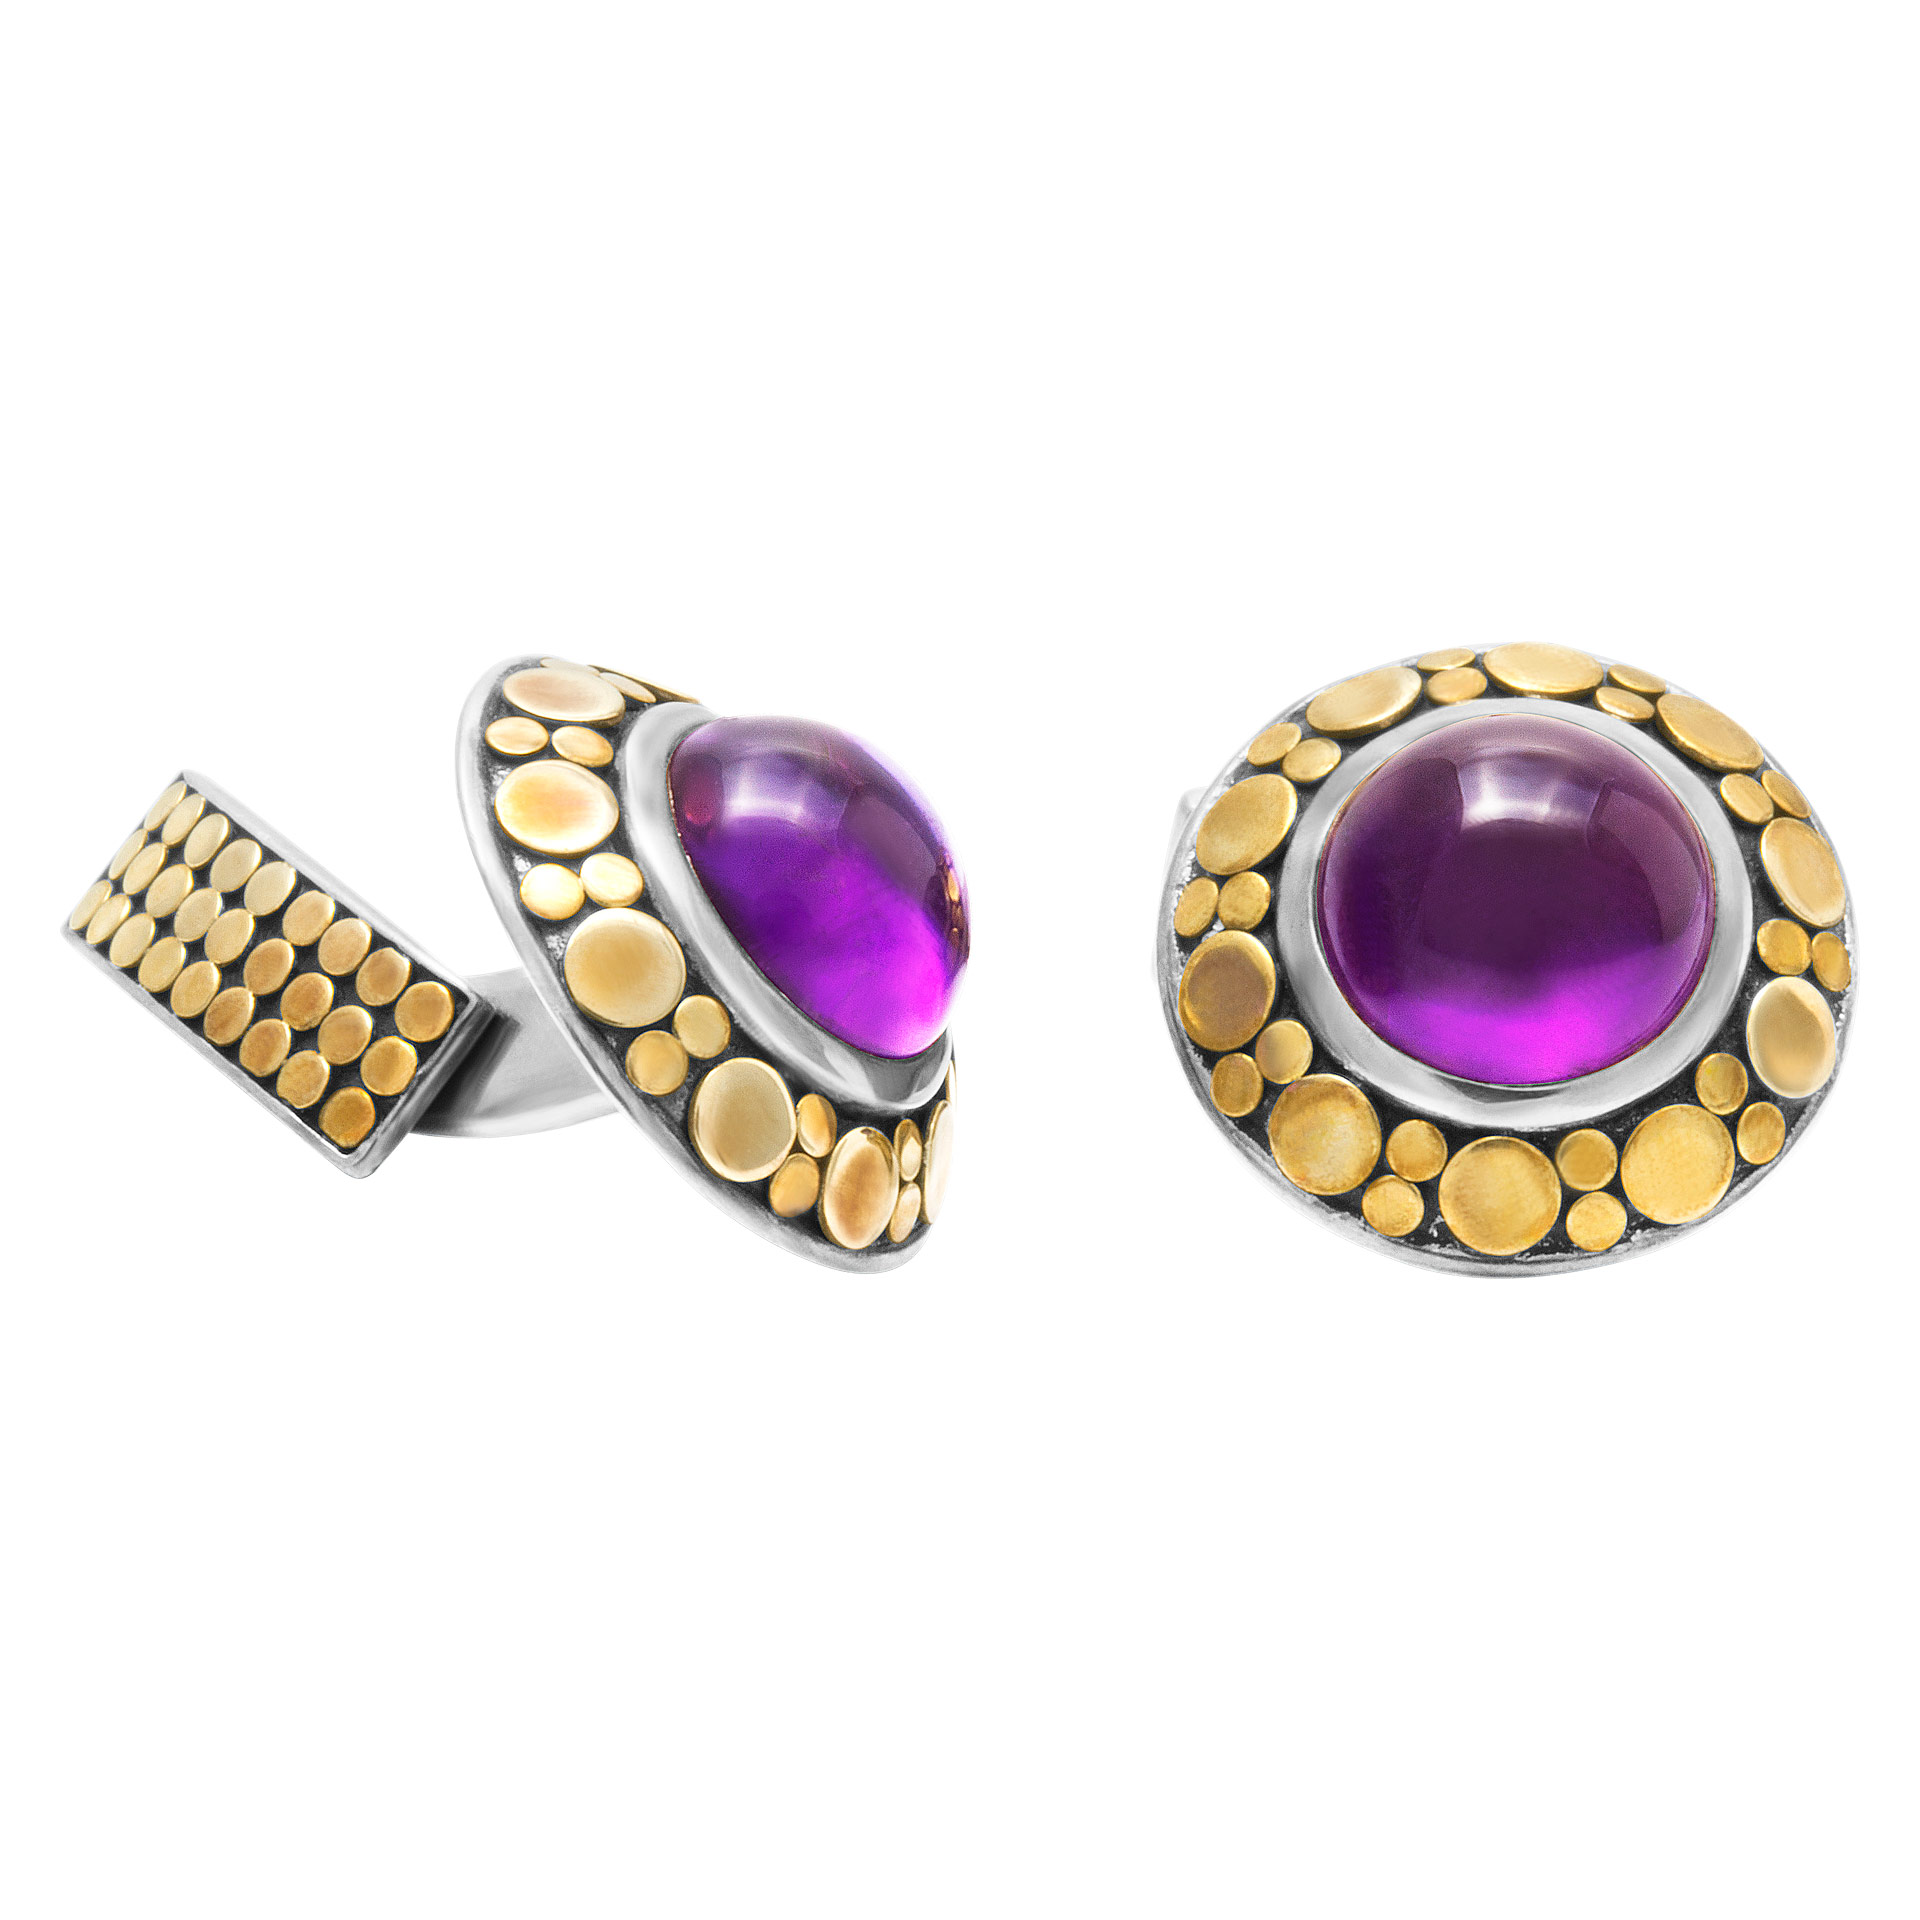 John Hardy cufflinks in 18k yellow gold and sterling silver with Amethyst stone